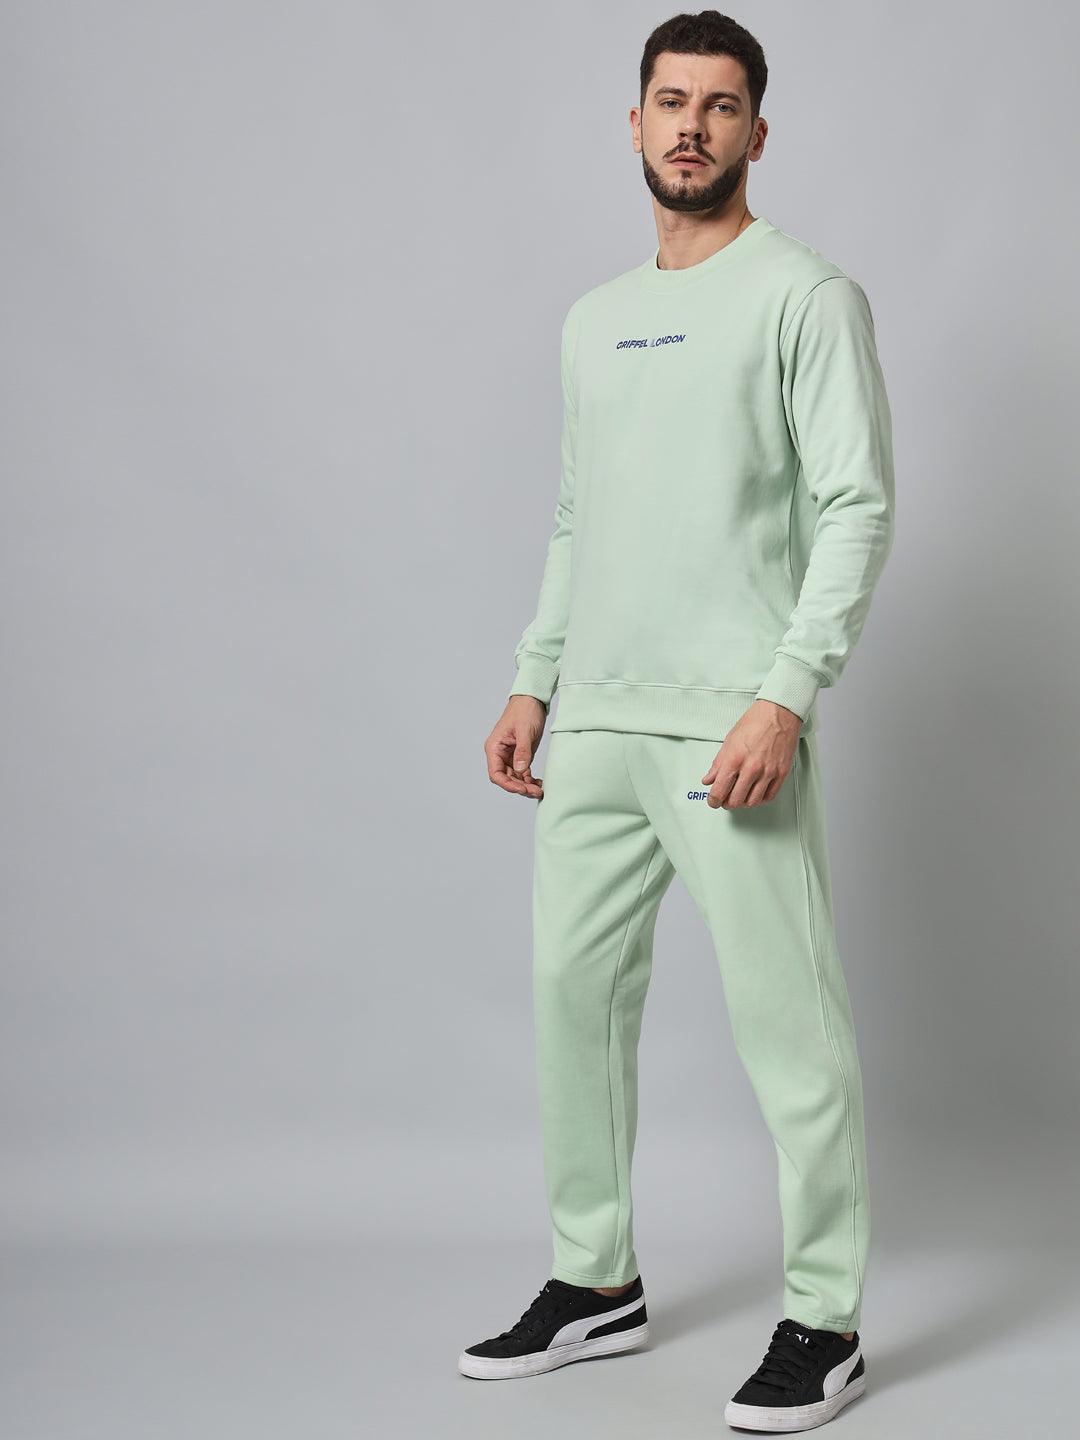 Griffel Men's Front Logo Solid Fleece Basic R-Neck and Joggers Full set Sea Green Tracksuit - griffel